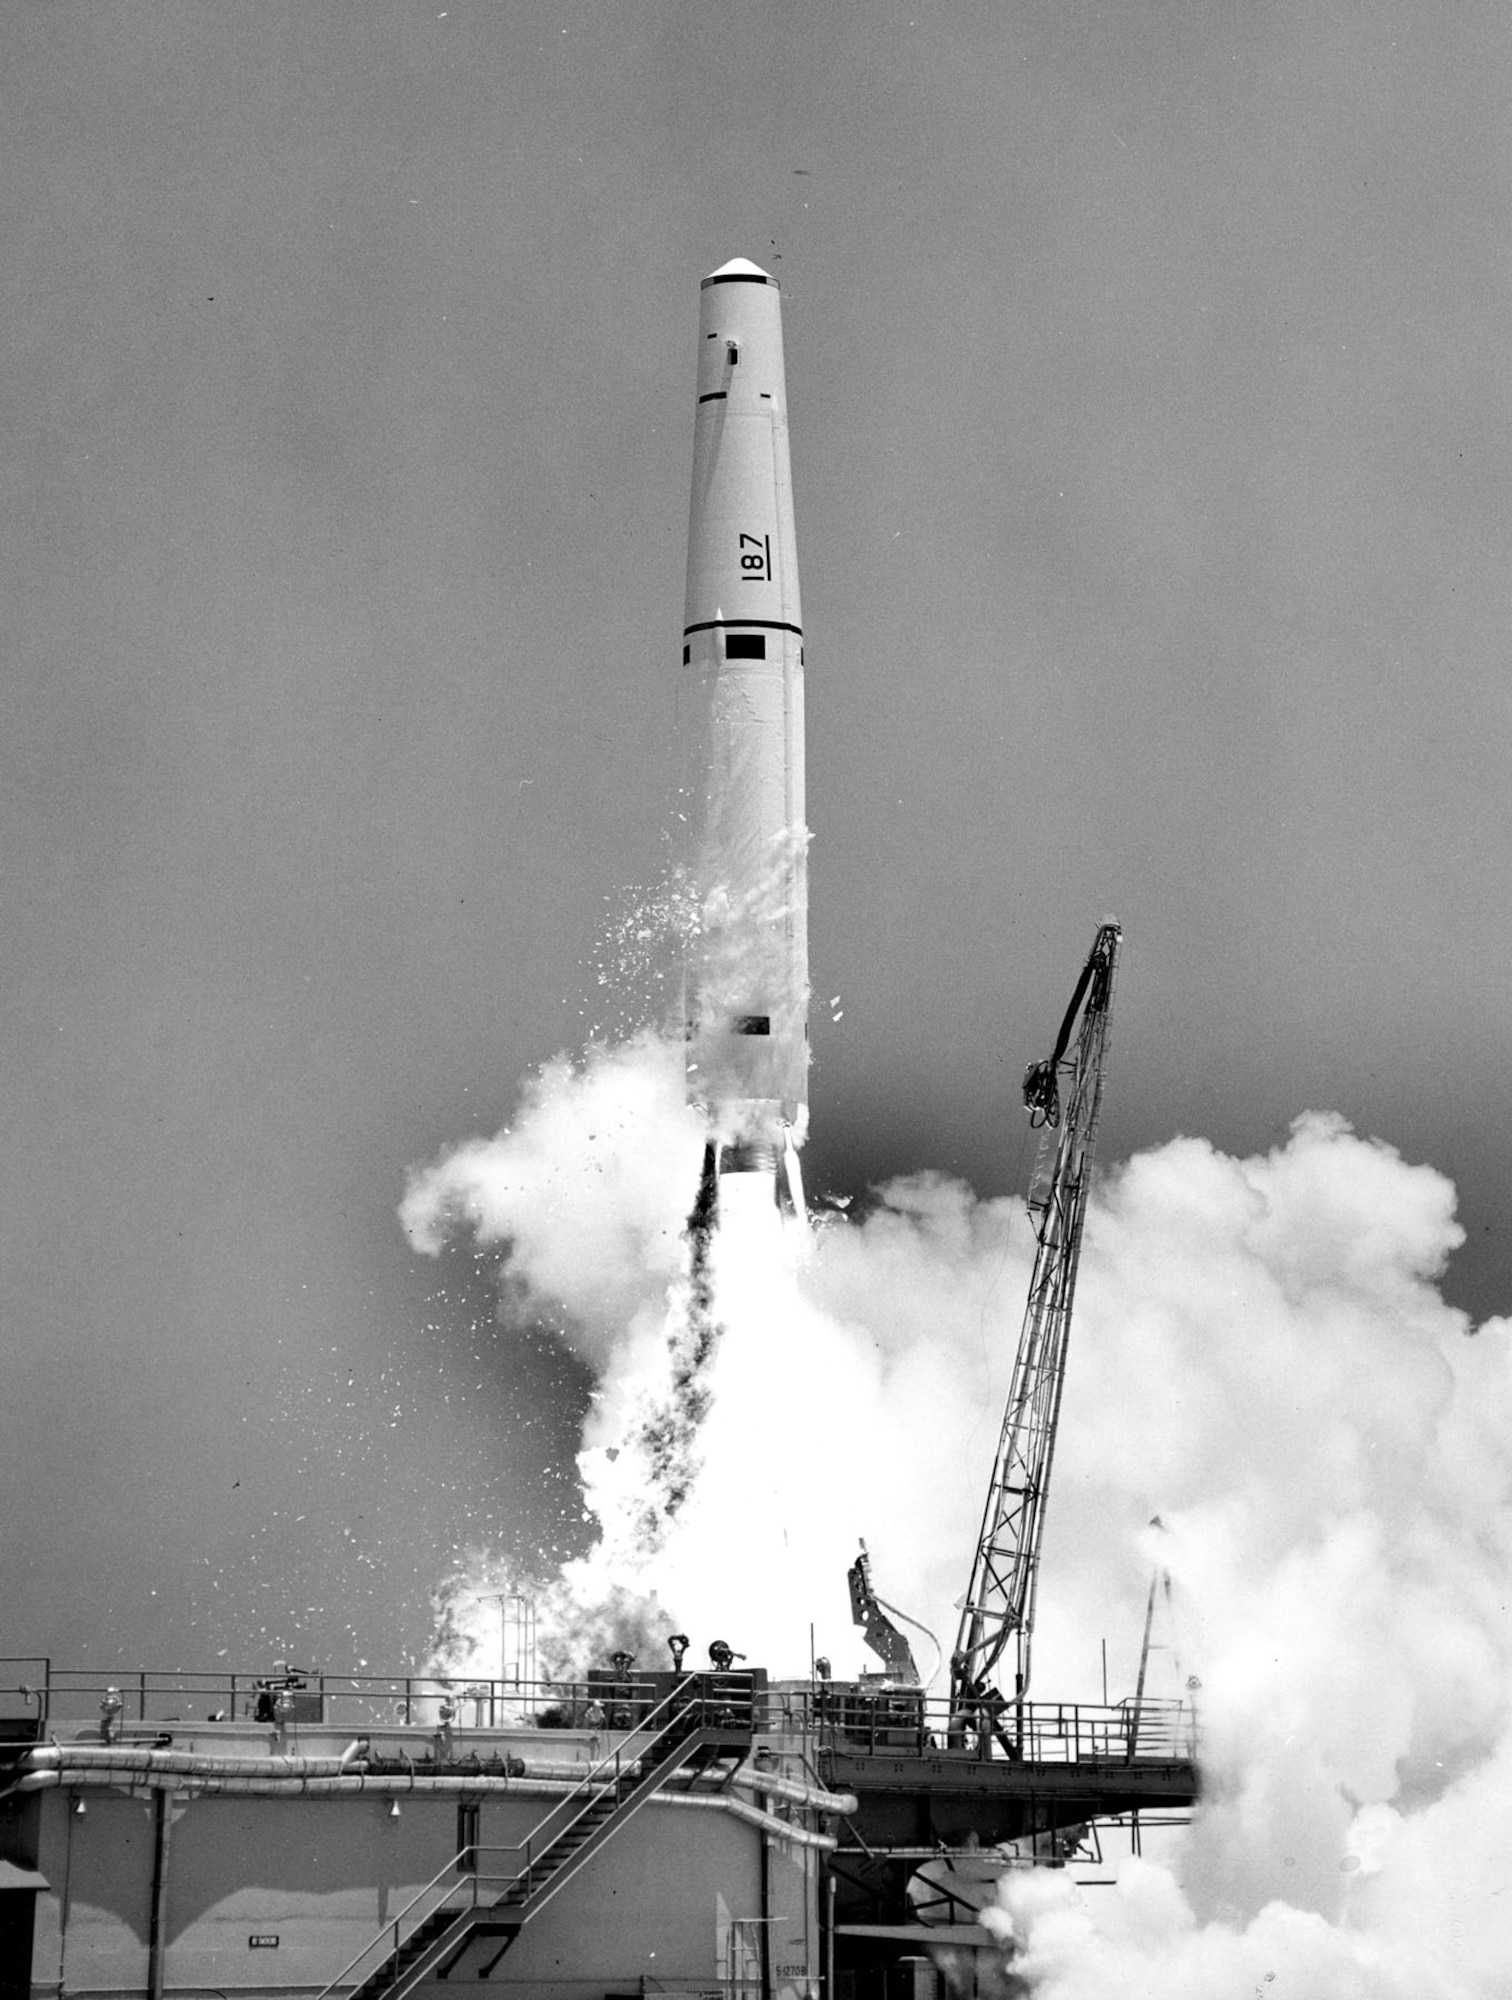 A test Thor takes flight at Cape Canaveral, Fla., on Dec. 5, 1959. The small particles falling away from the rocket are ice formed from frozen condensation on the outside of the chilled liquid oxygen tank. (U.S. Air Force photo)